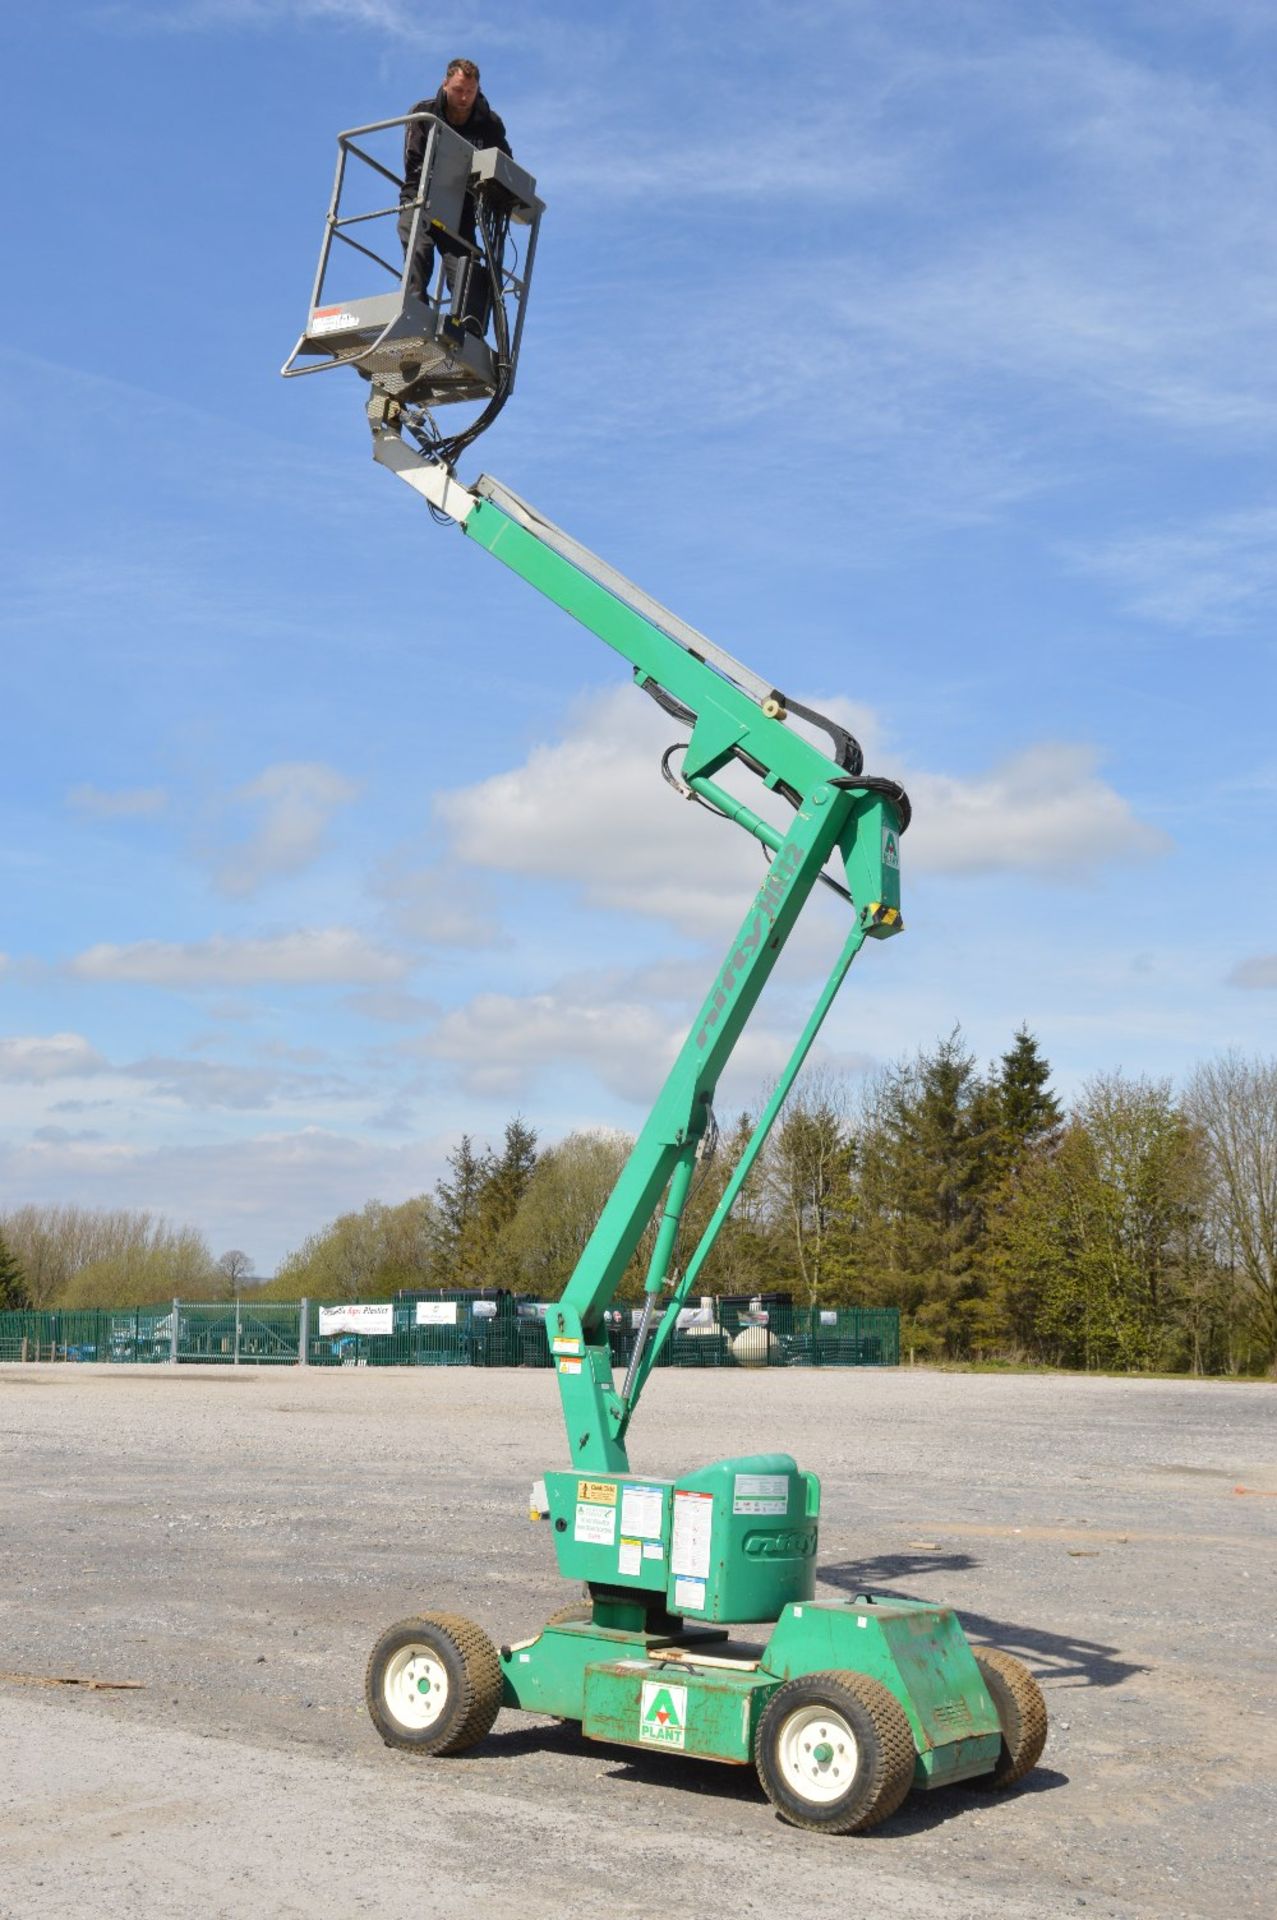 Nifty Lift HR 12 NDE diesel electric 12 metre boom lift   Year: 2007 S/N: 1217170 A448715 - Image 8 of 8